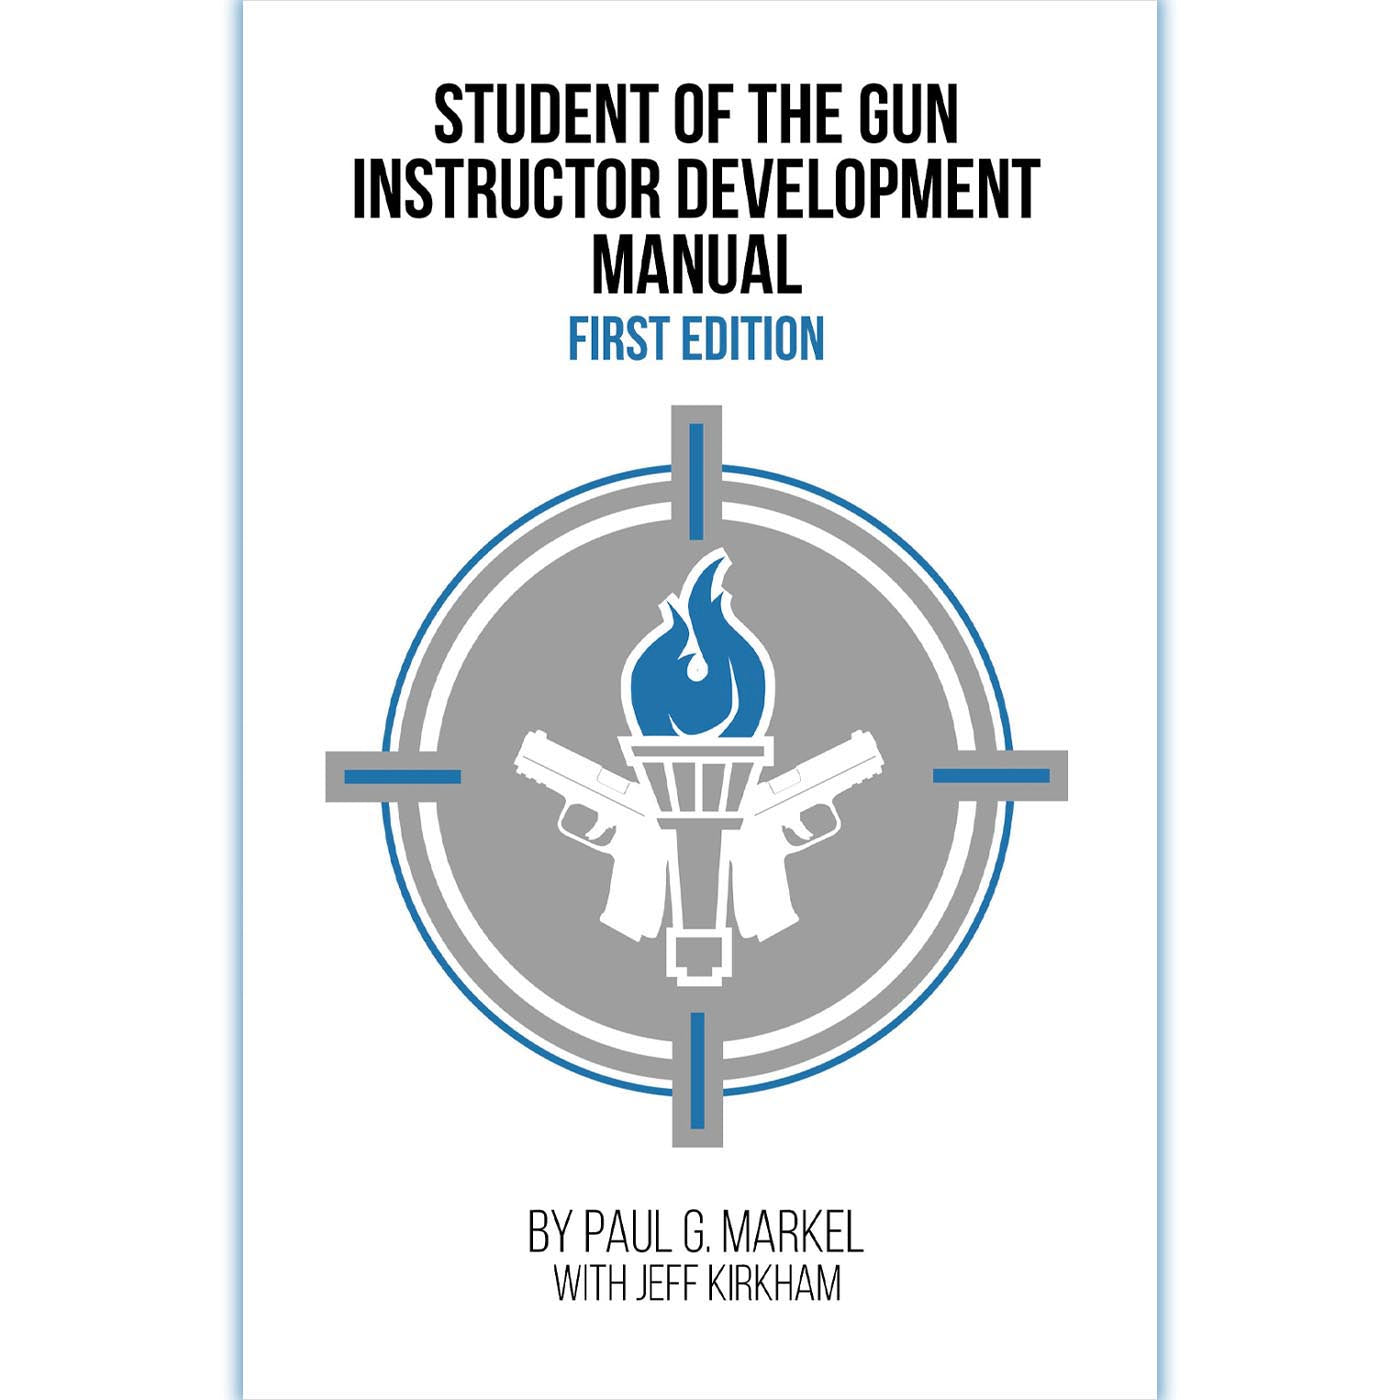 SOTG Instructor Development Manual: First Edition